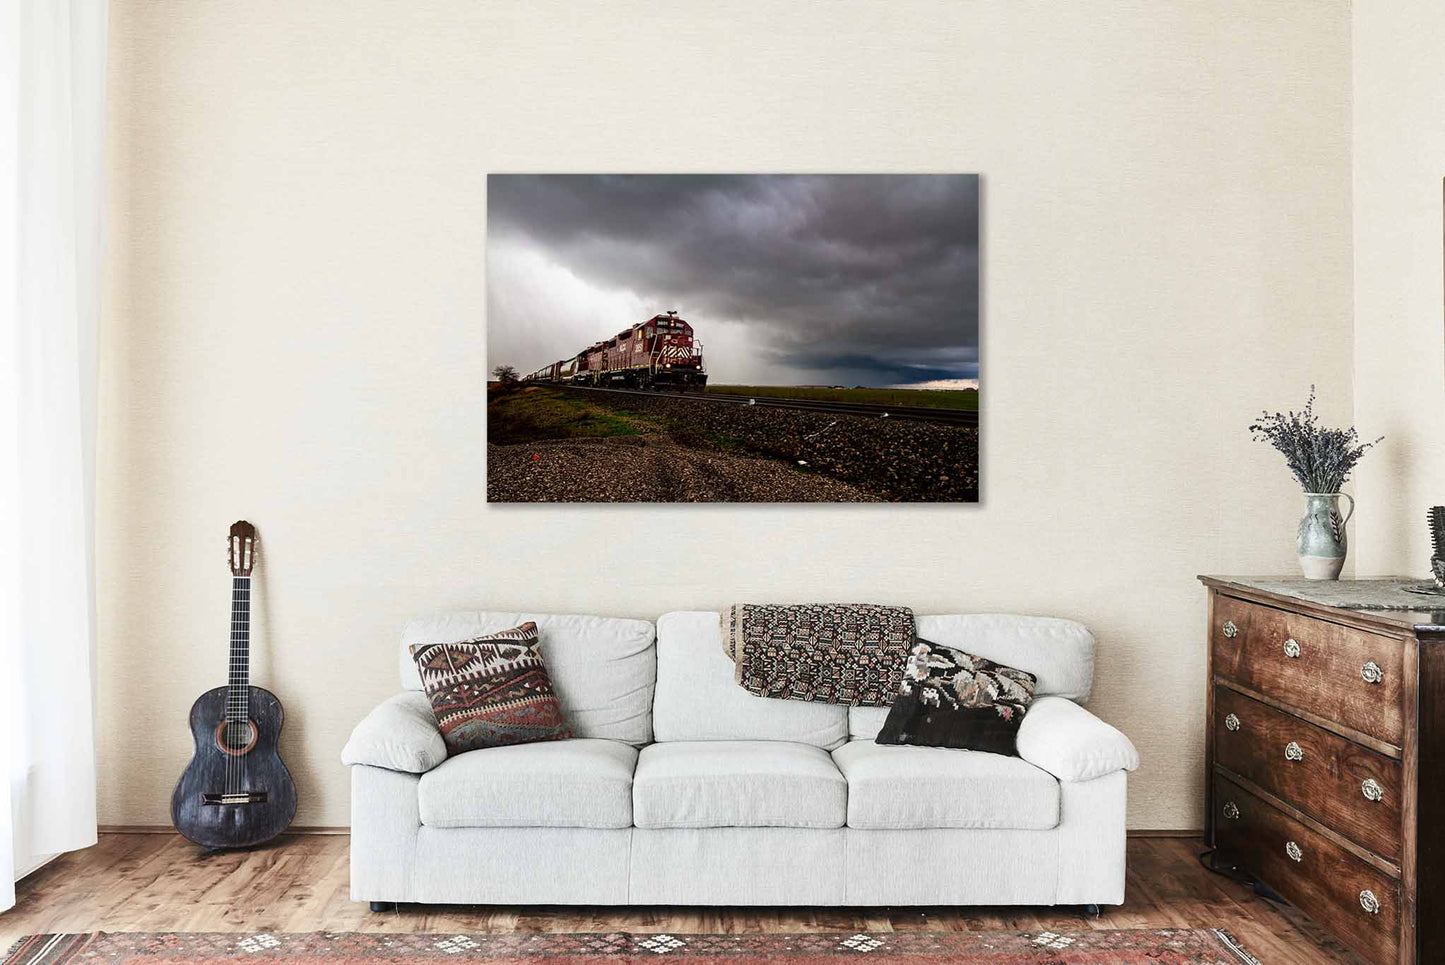 Train Metal Print | Locomotive Emerging from Storm Photo | Thunderstorm Photography | Oklahoma Picture | Railroad Decor